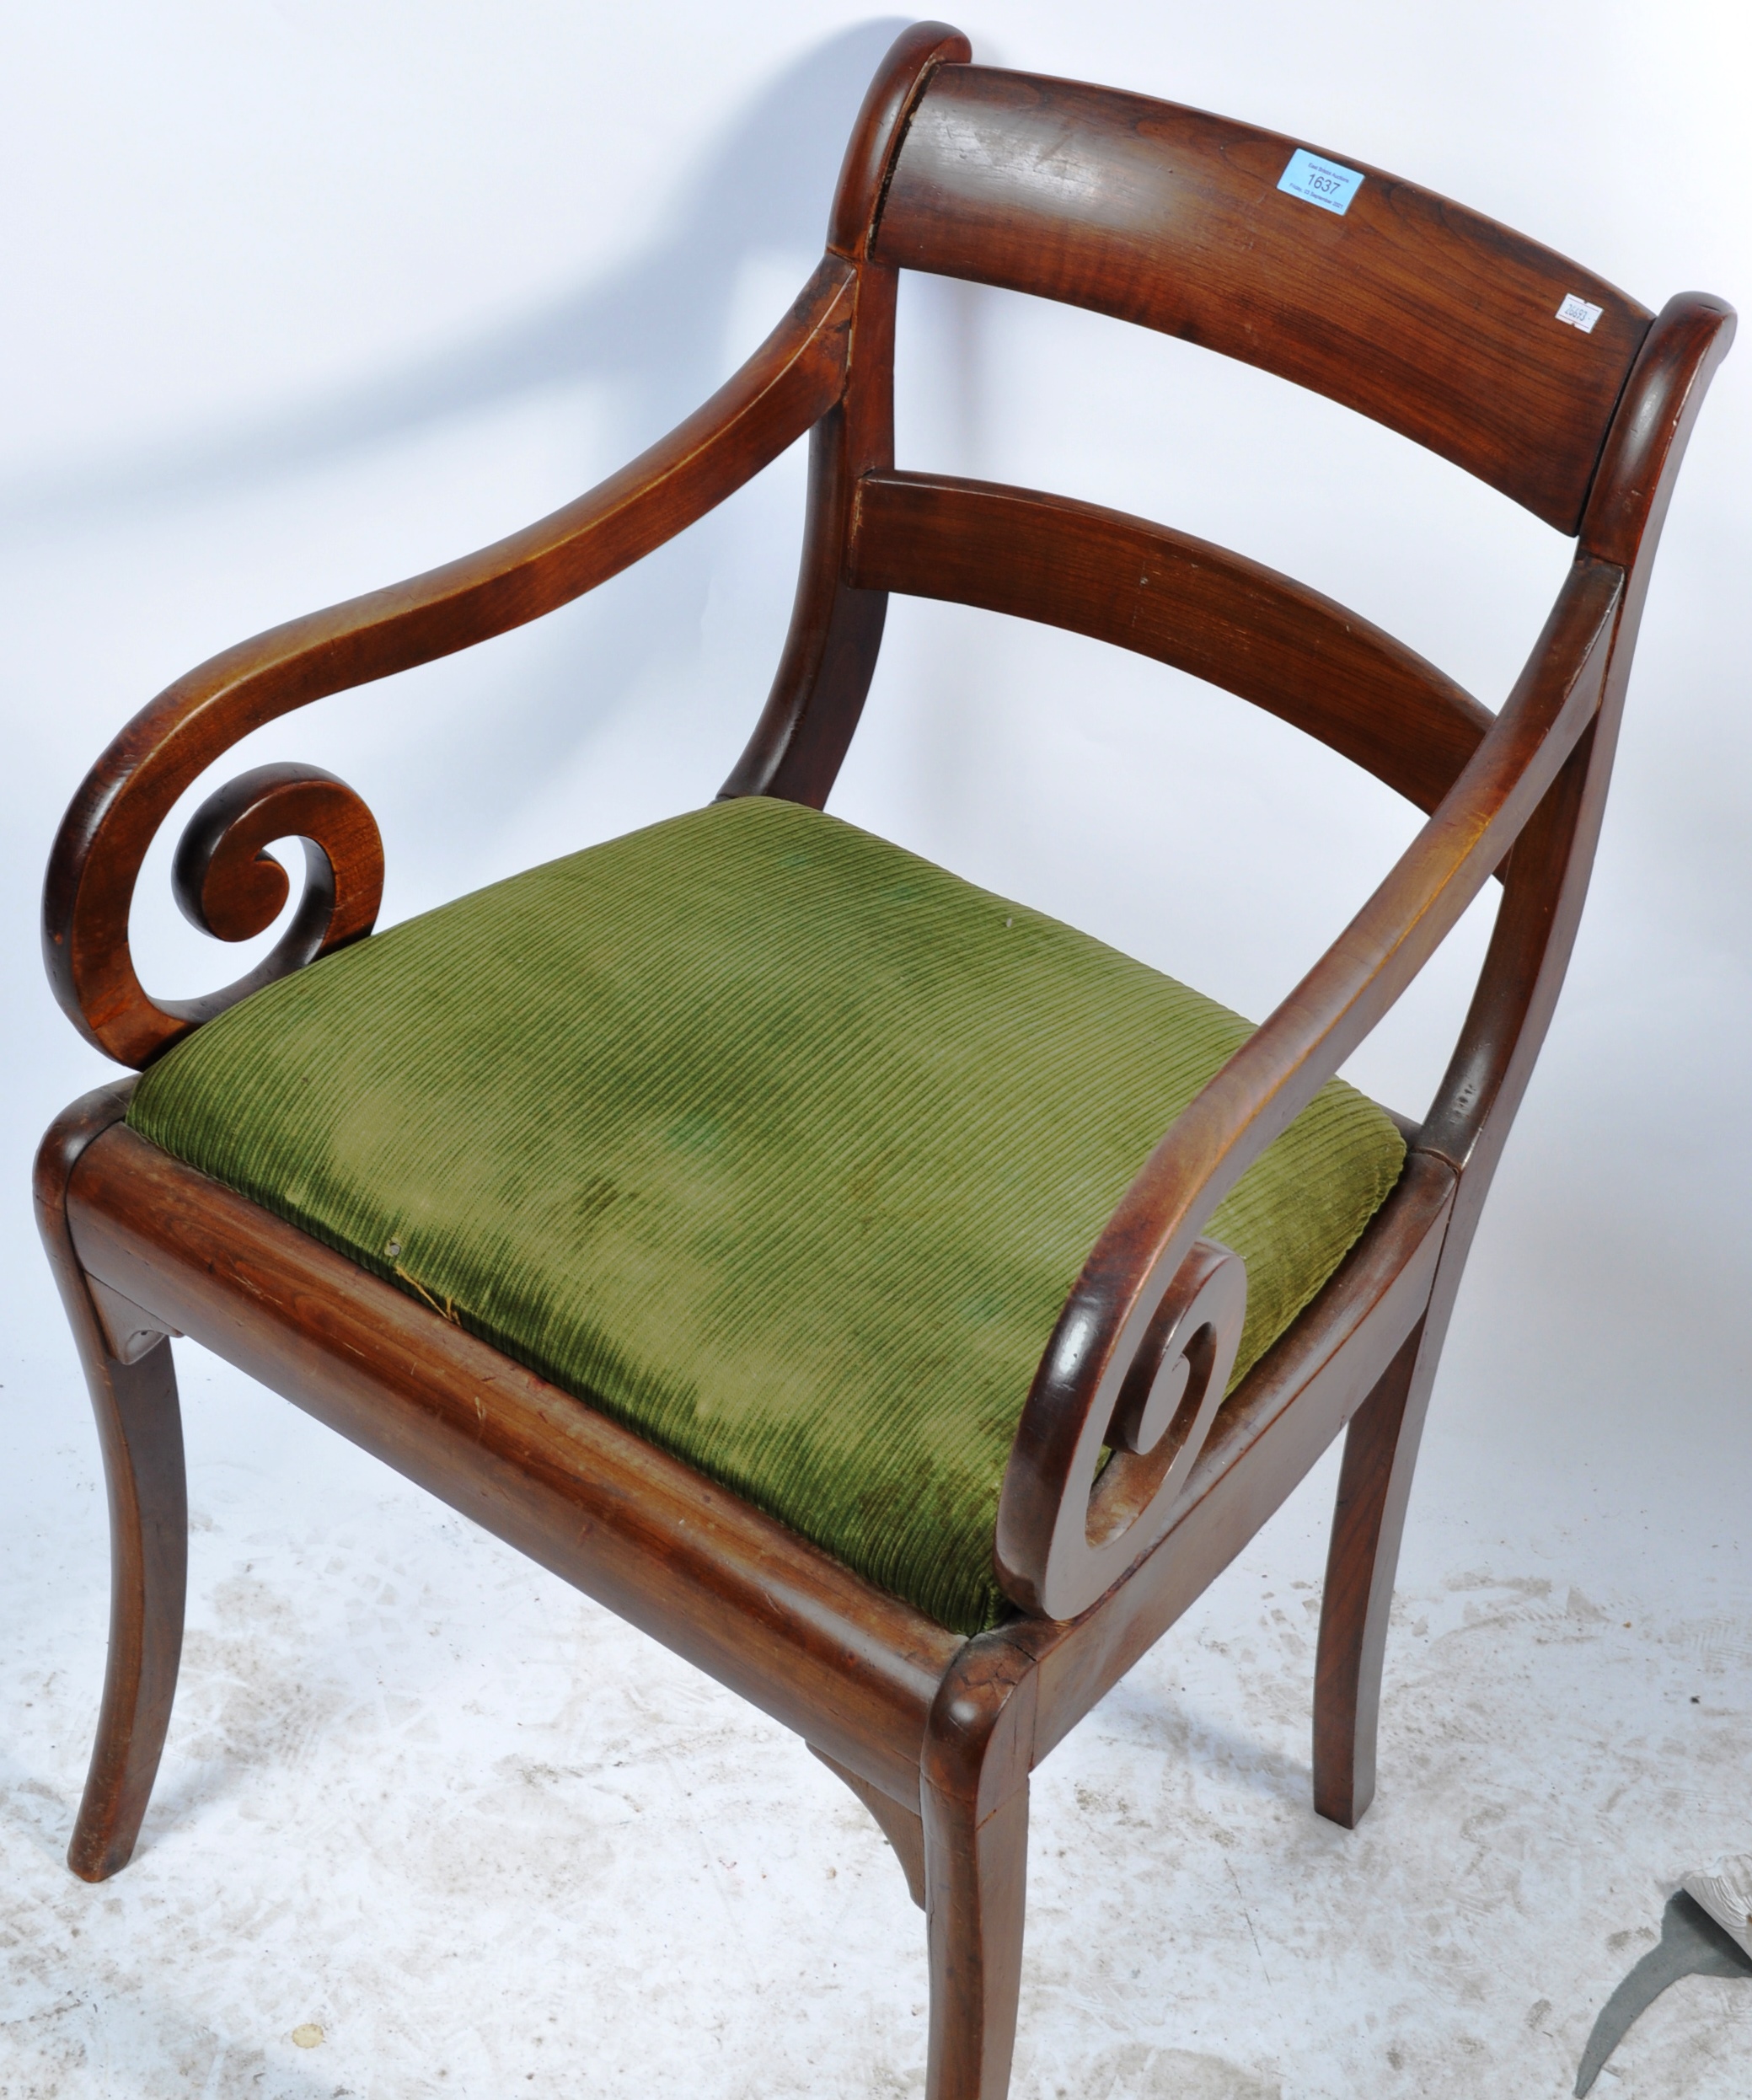 EARLY 19TH CENTURY REGENCY MAHOGANY SCROLLED ARM CHAIR - Image 4 of 8